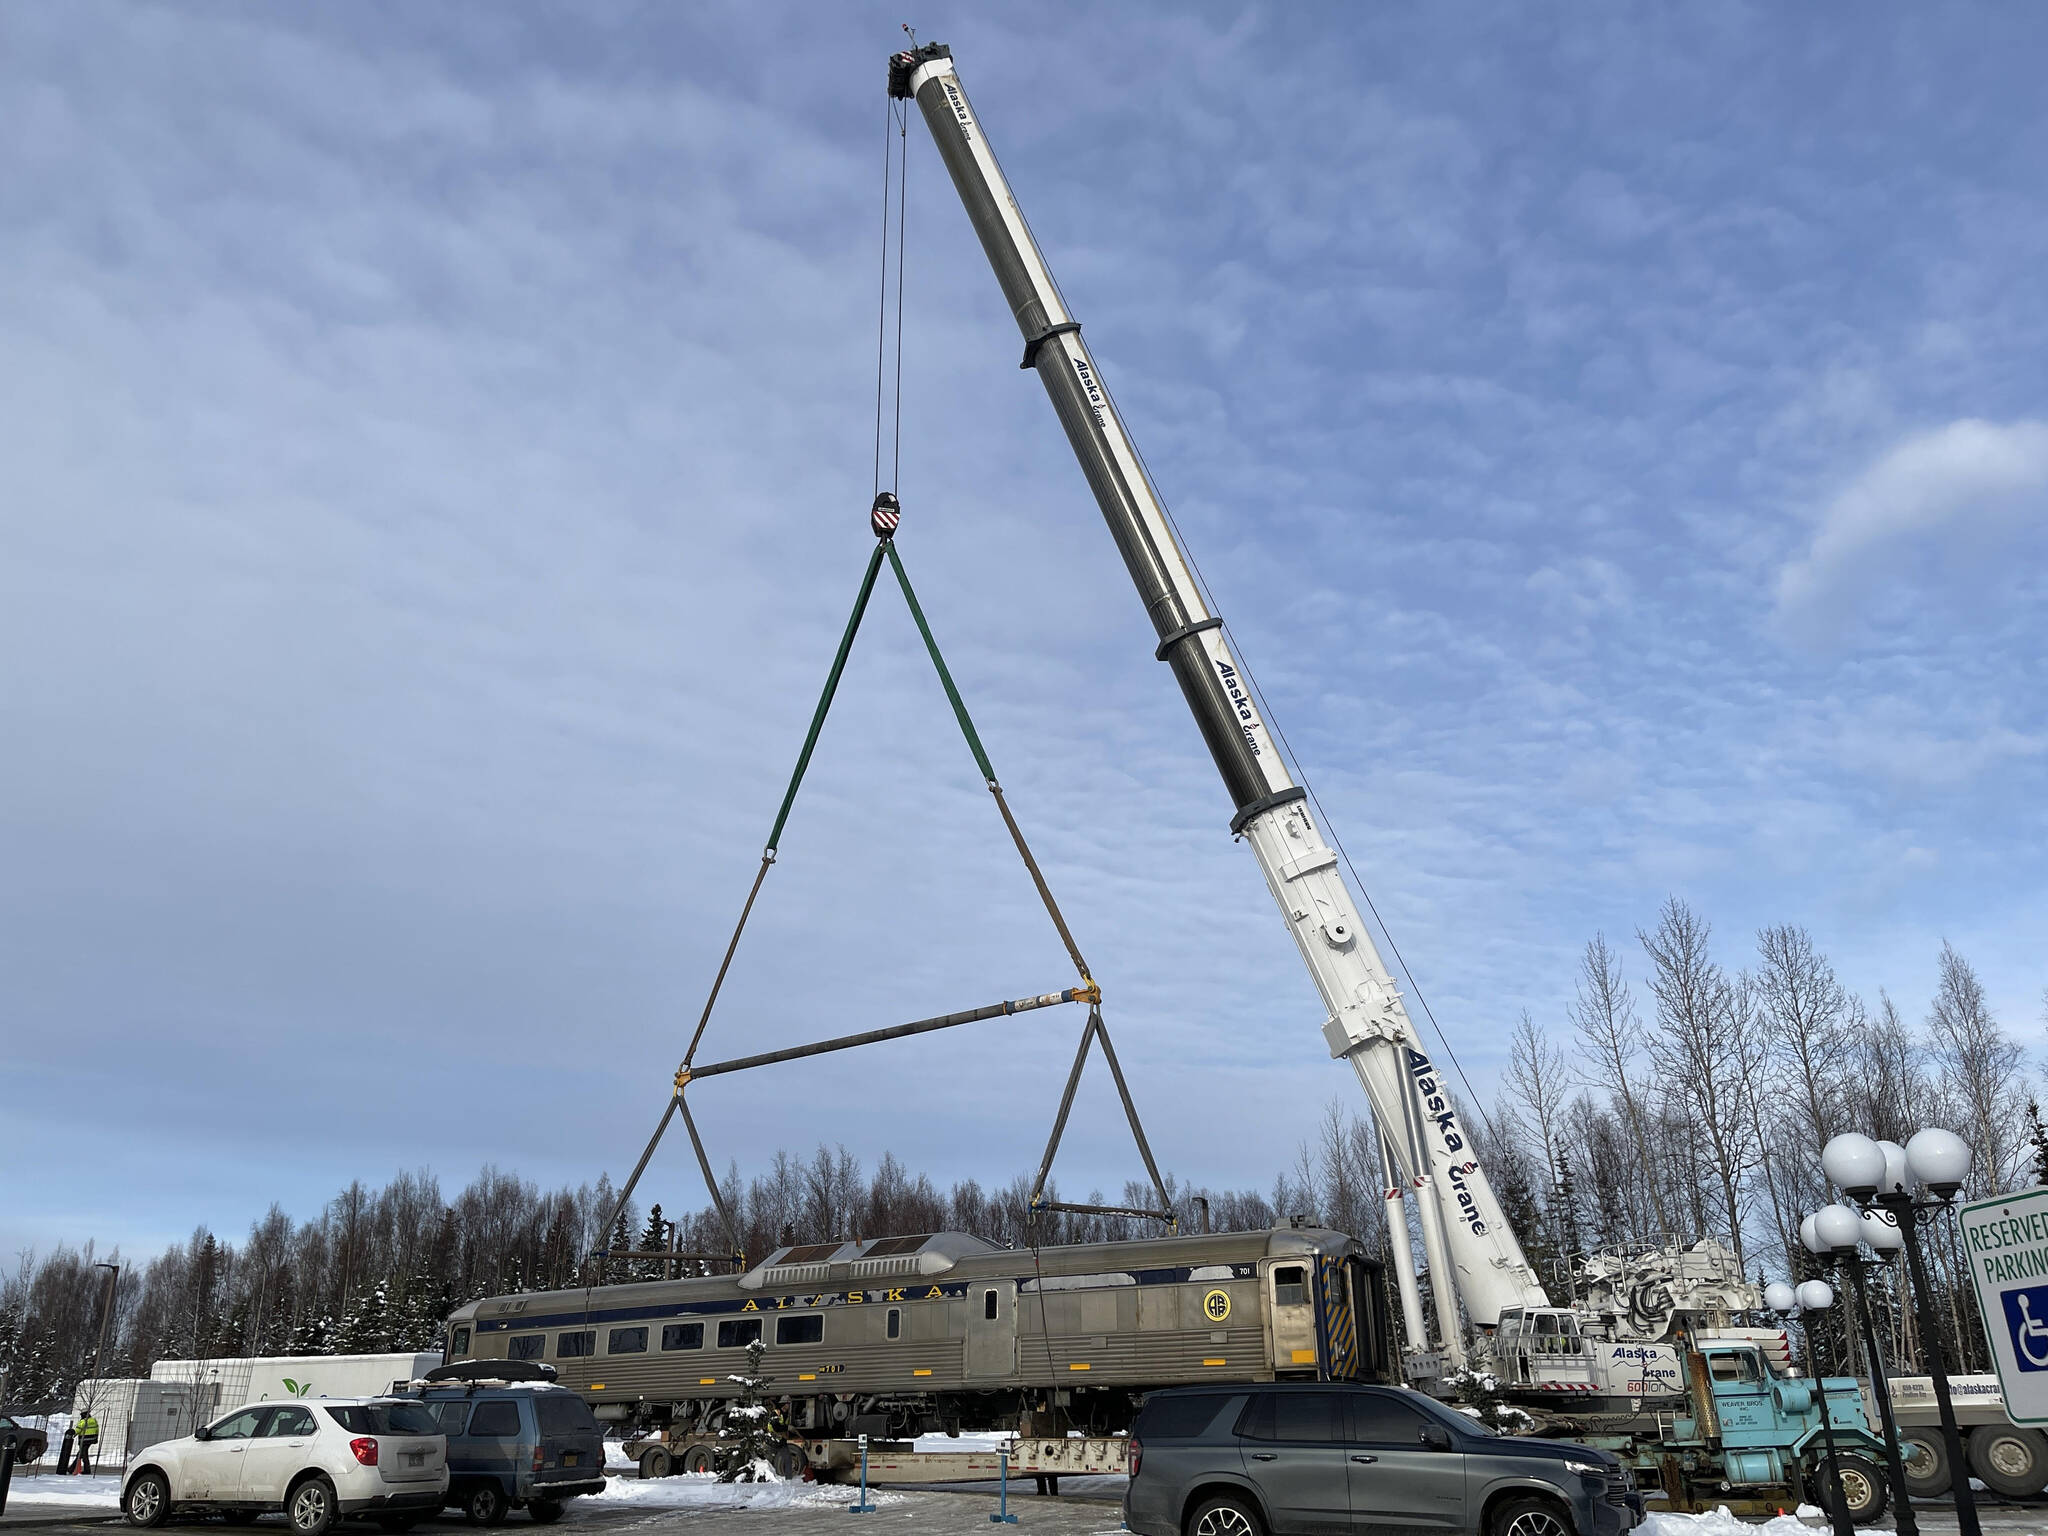 A new train car is hooked to a massive crane in preparation for placement on Whistle Hill in Soldotna, Alaska, on Saturday, Oct. 29, 2022. (Jake Dye/Peninsula Clarion)